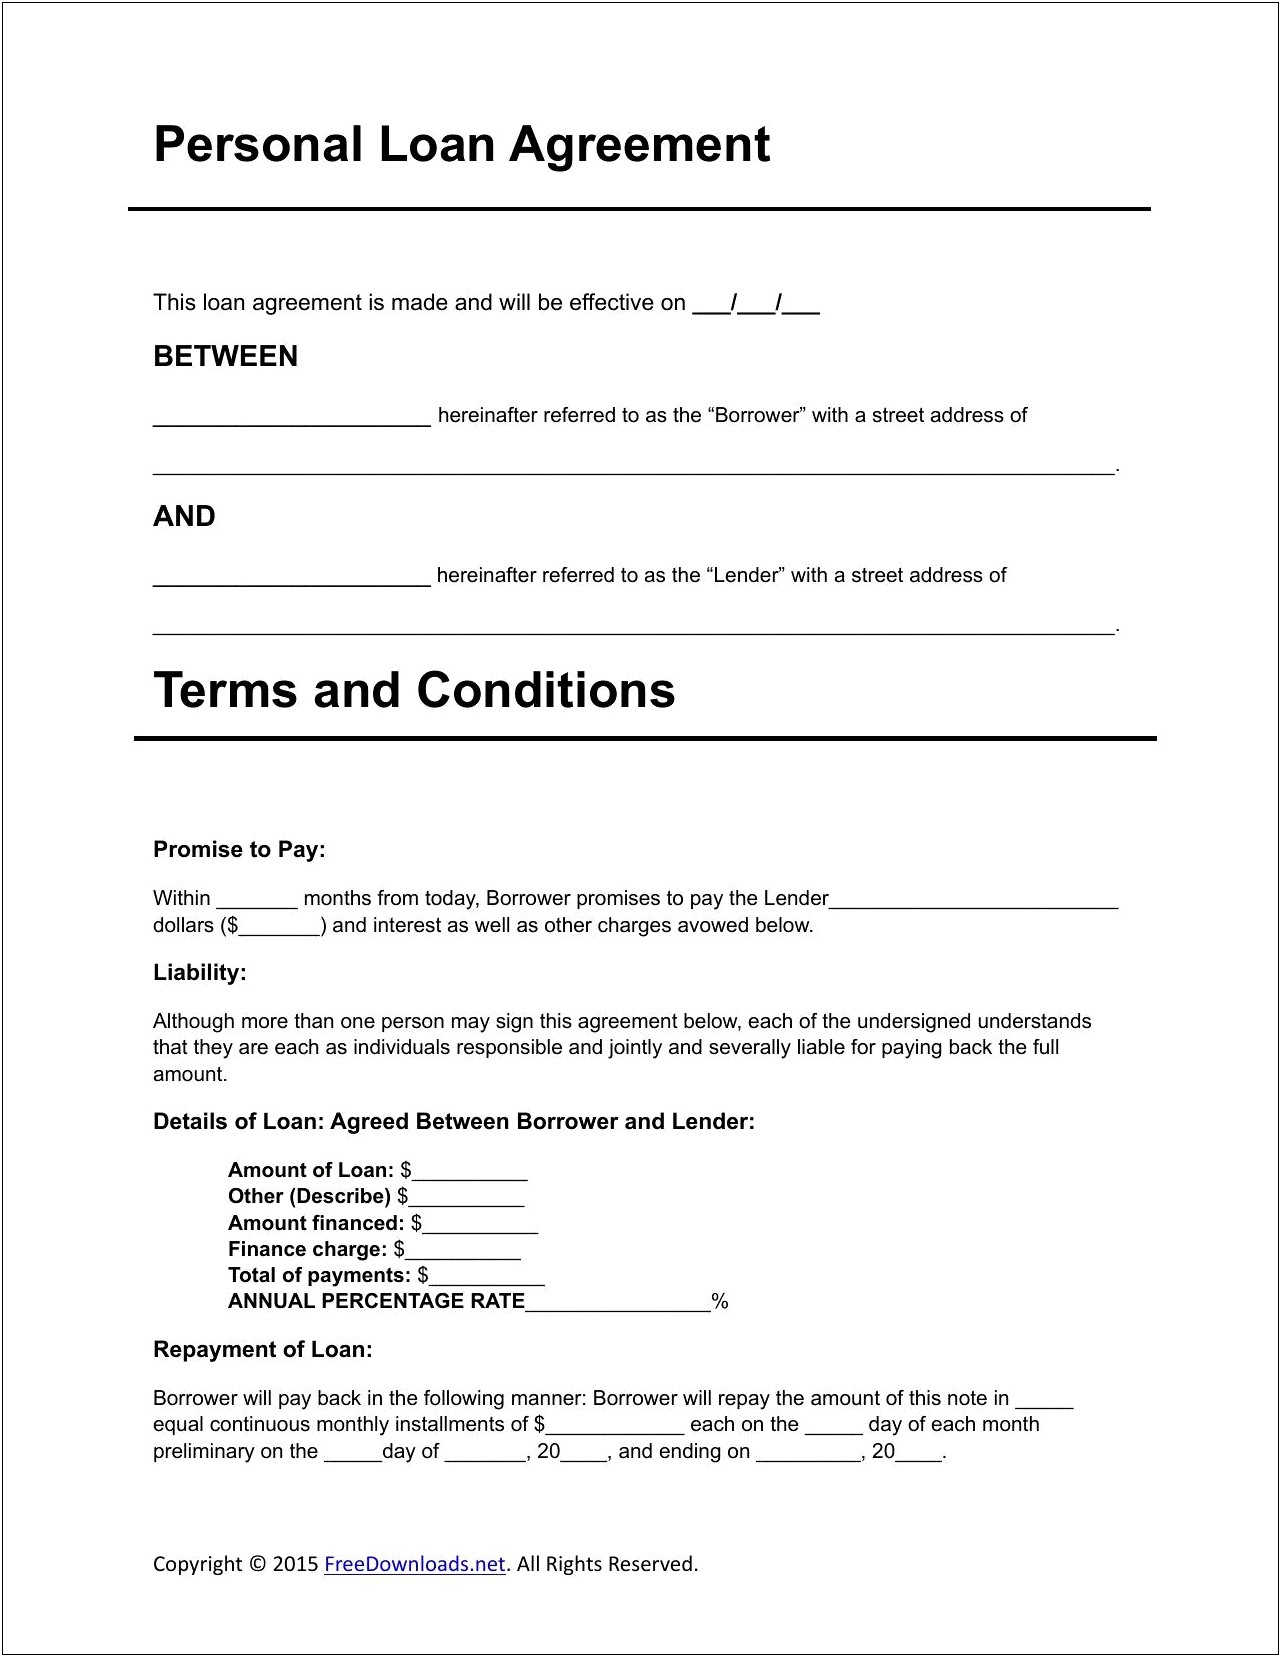 Personal Loan Contract Template Microsoft Word